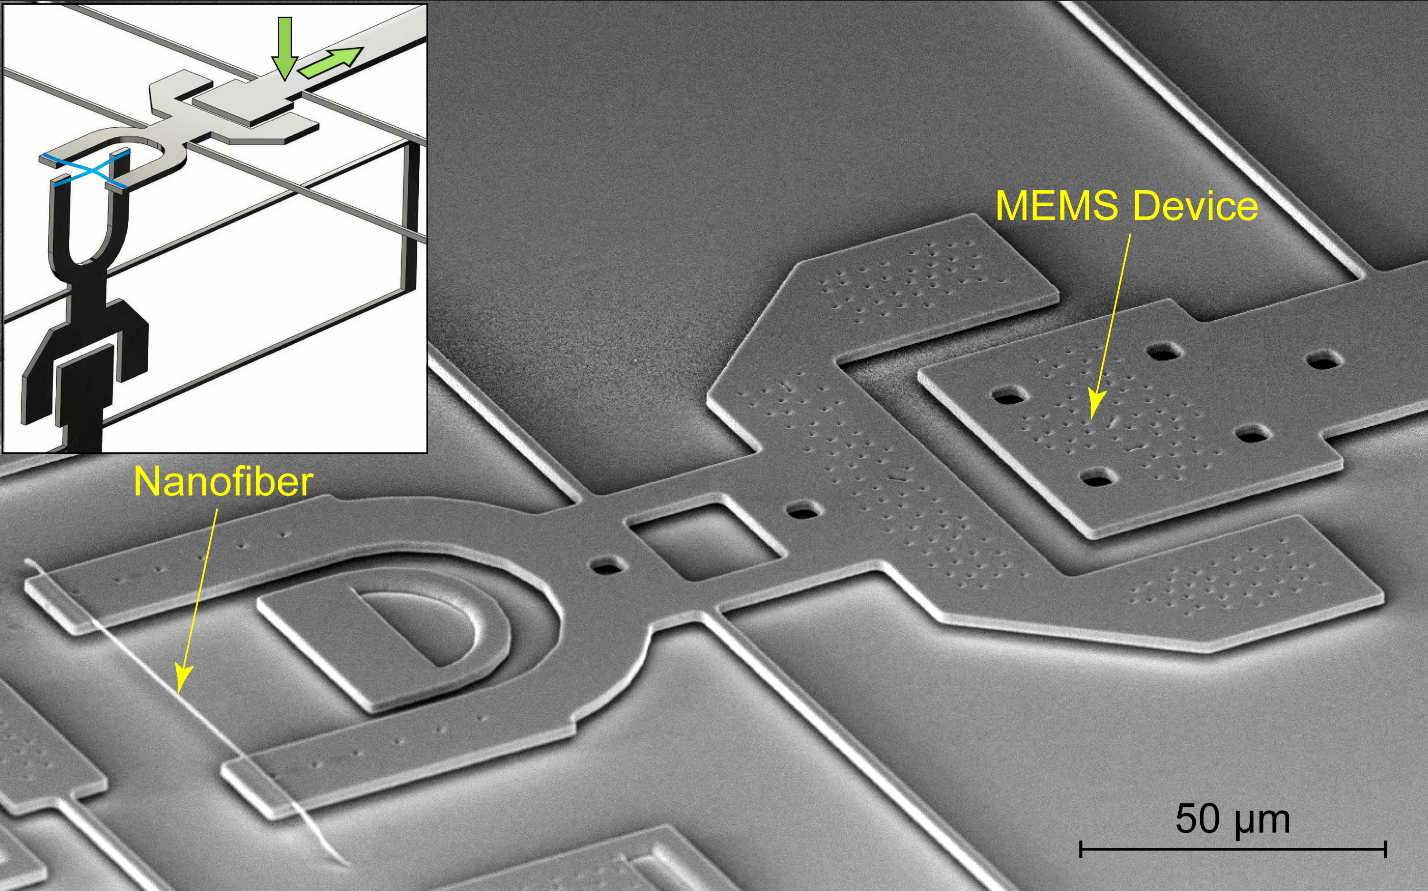 A polymer nanofiber, smaller than one hundredth the size of a human hair, mounted on a MEMS mechanical testing device